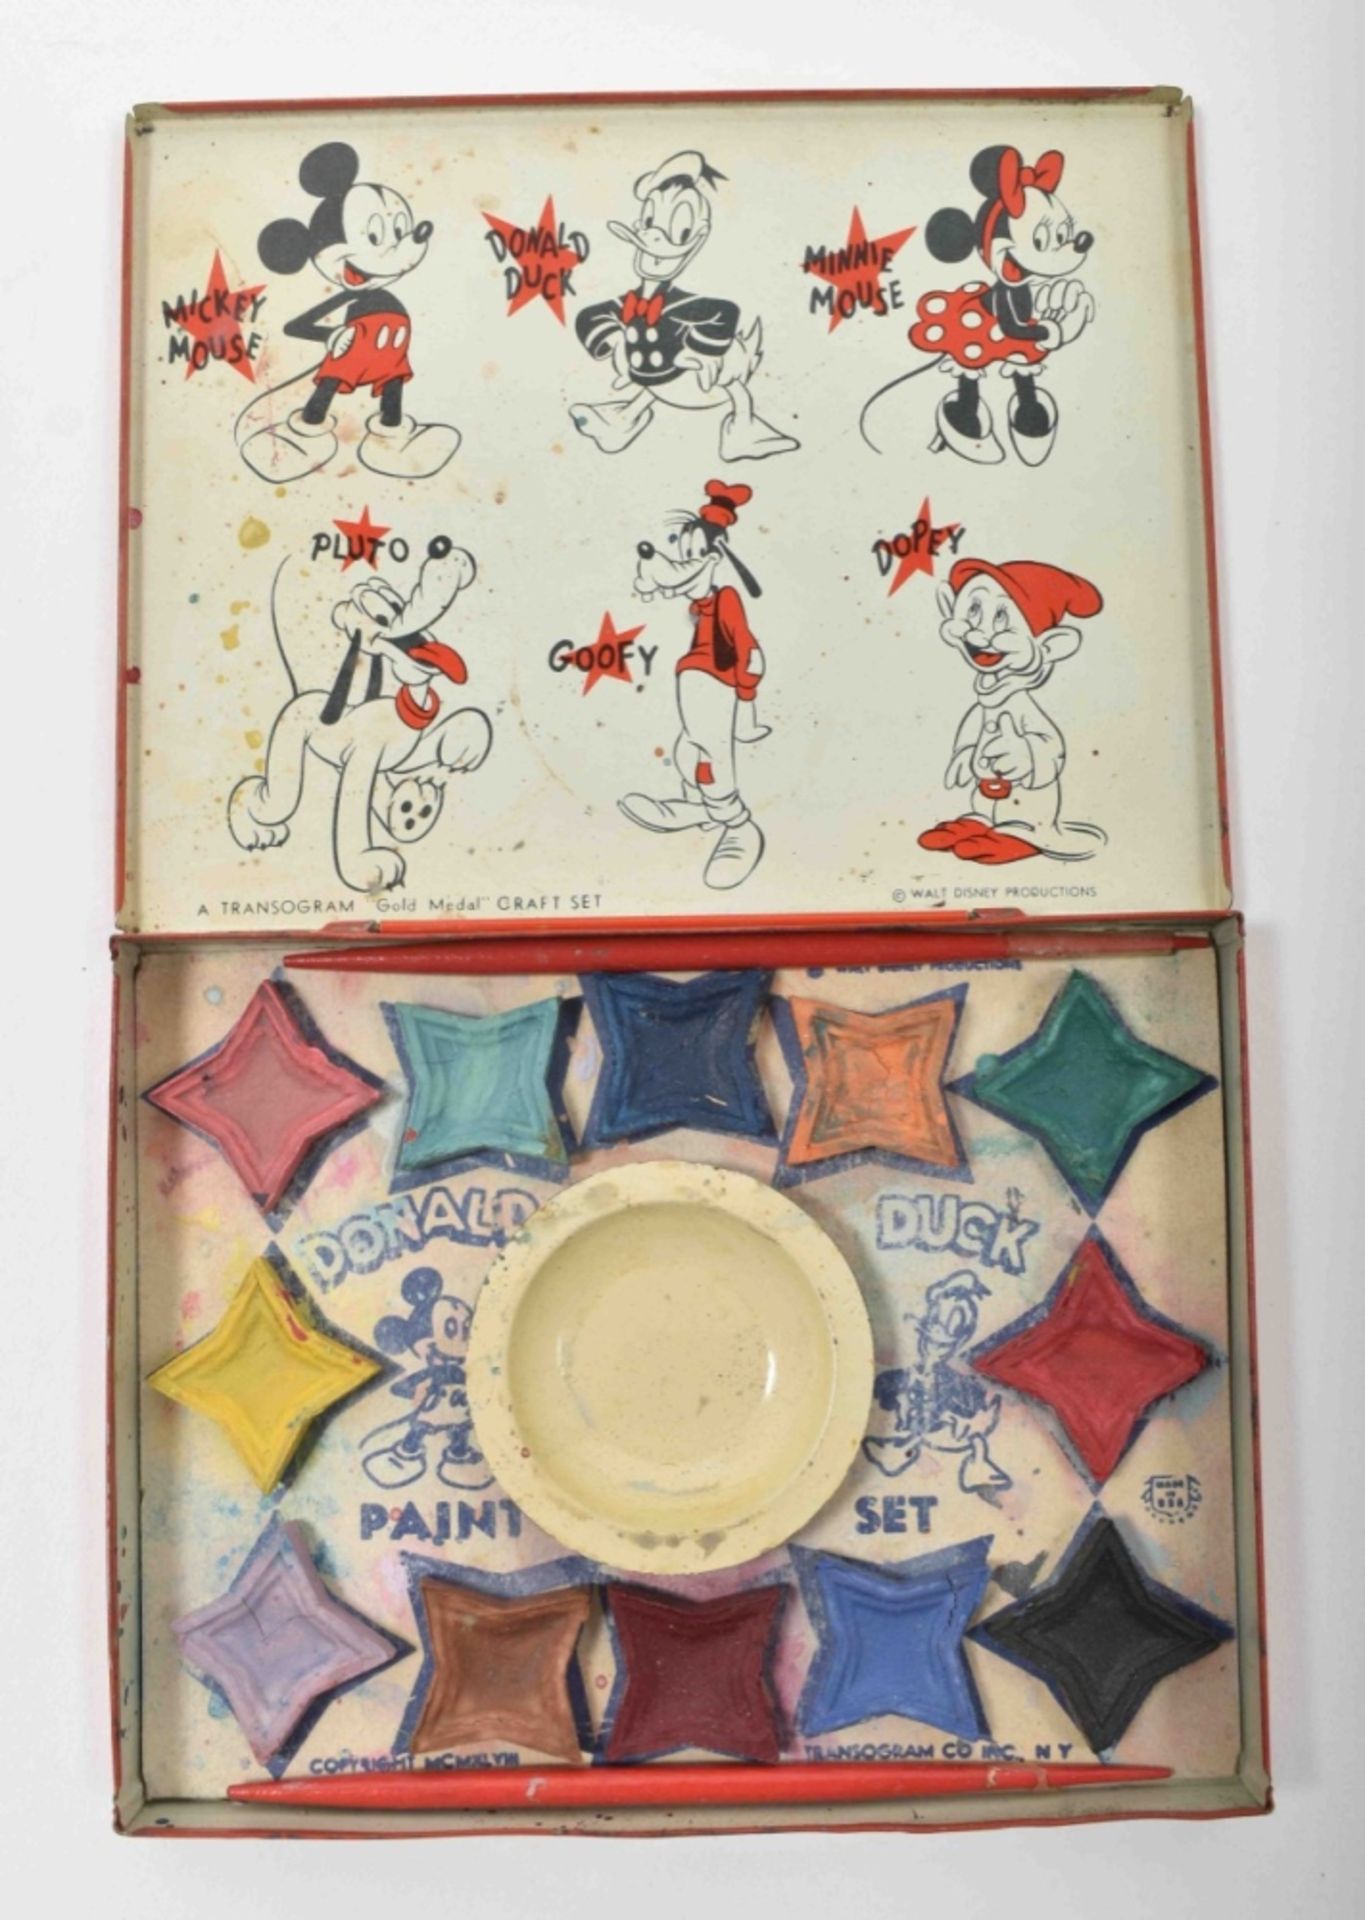 [Walt Disney] Mickey Mouse Library of Games - Image 6 of 6